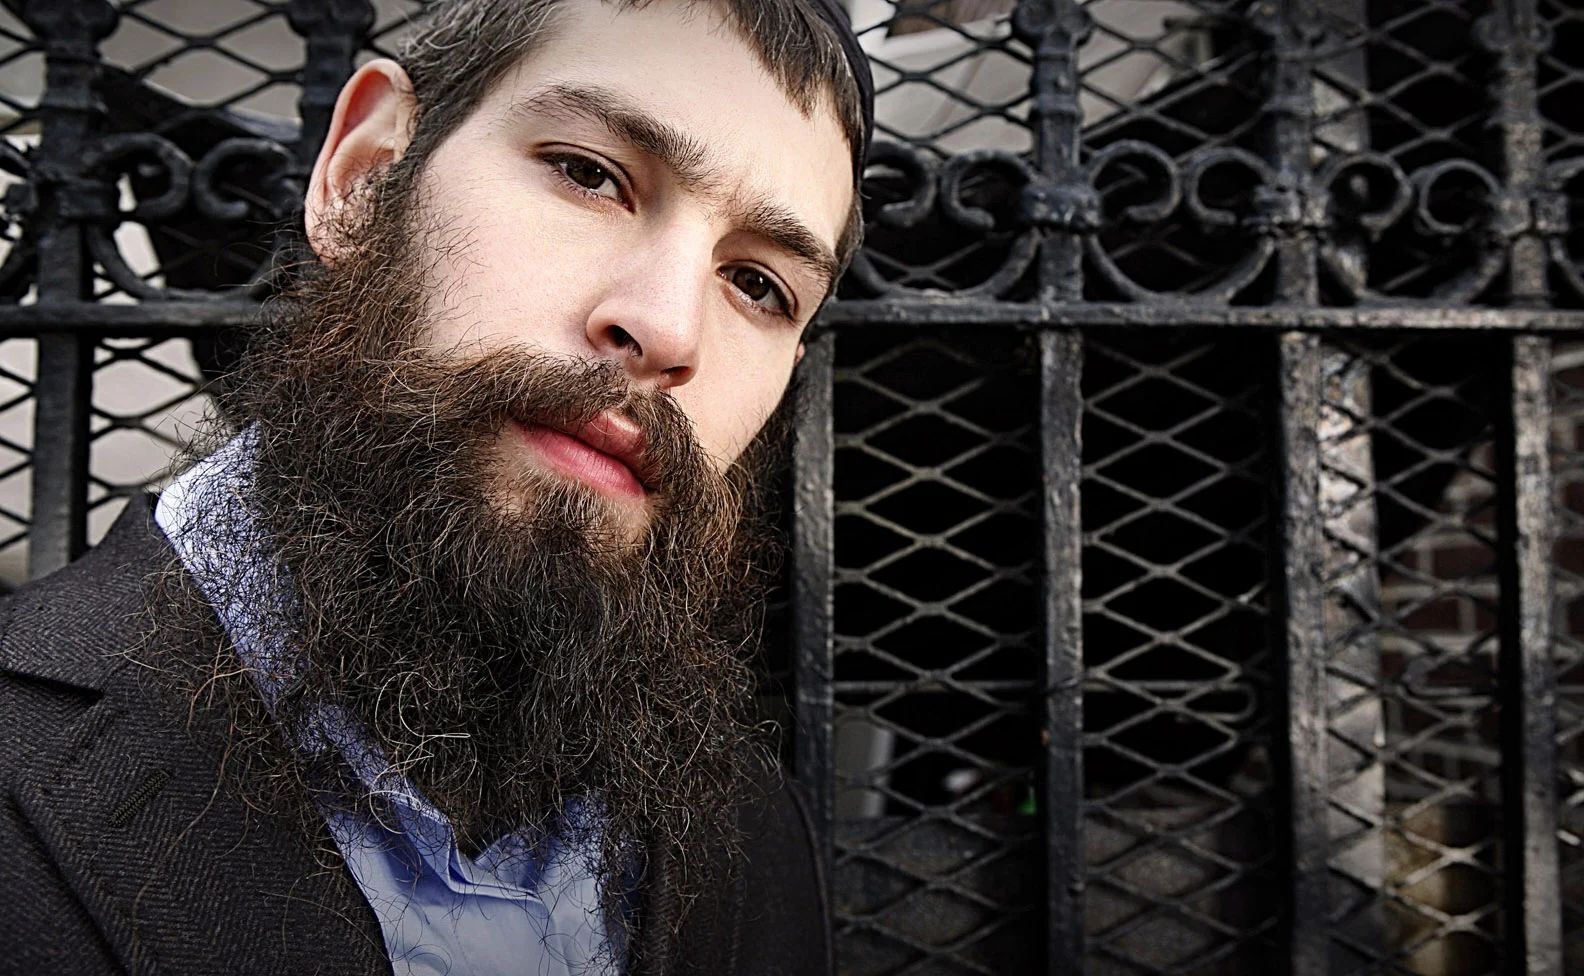 Matisyahu’s Passionate Street Performance And Message Of Resilience